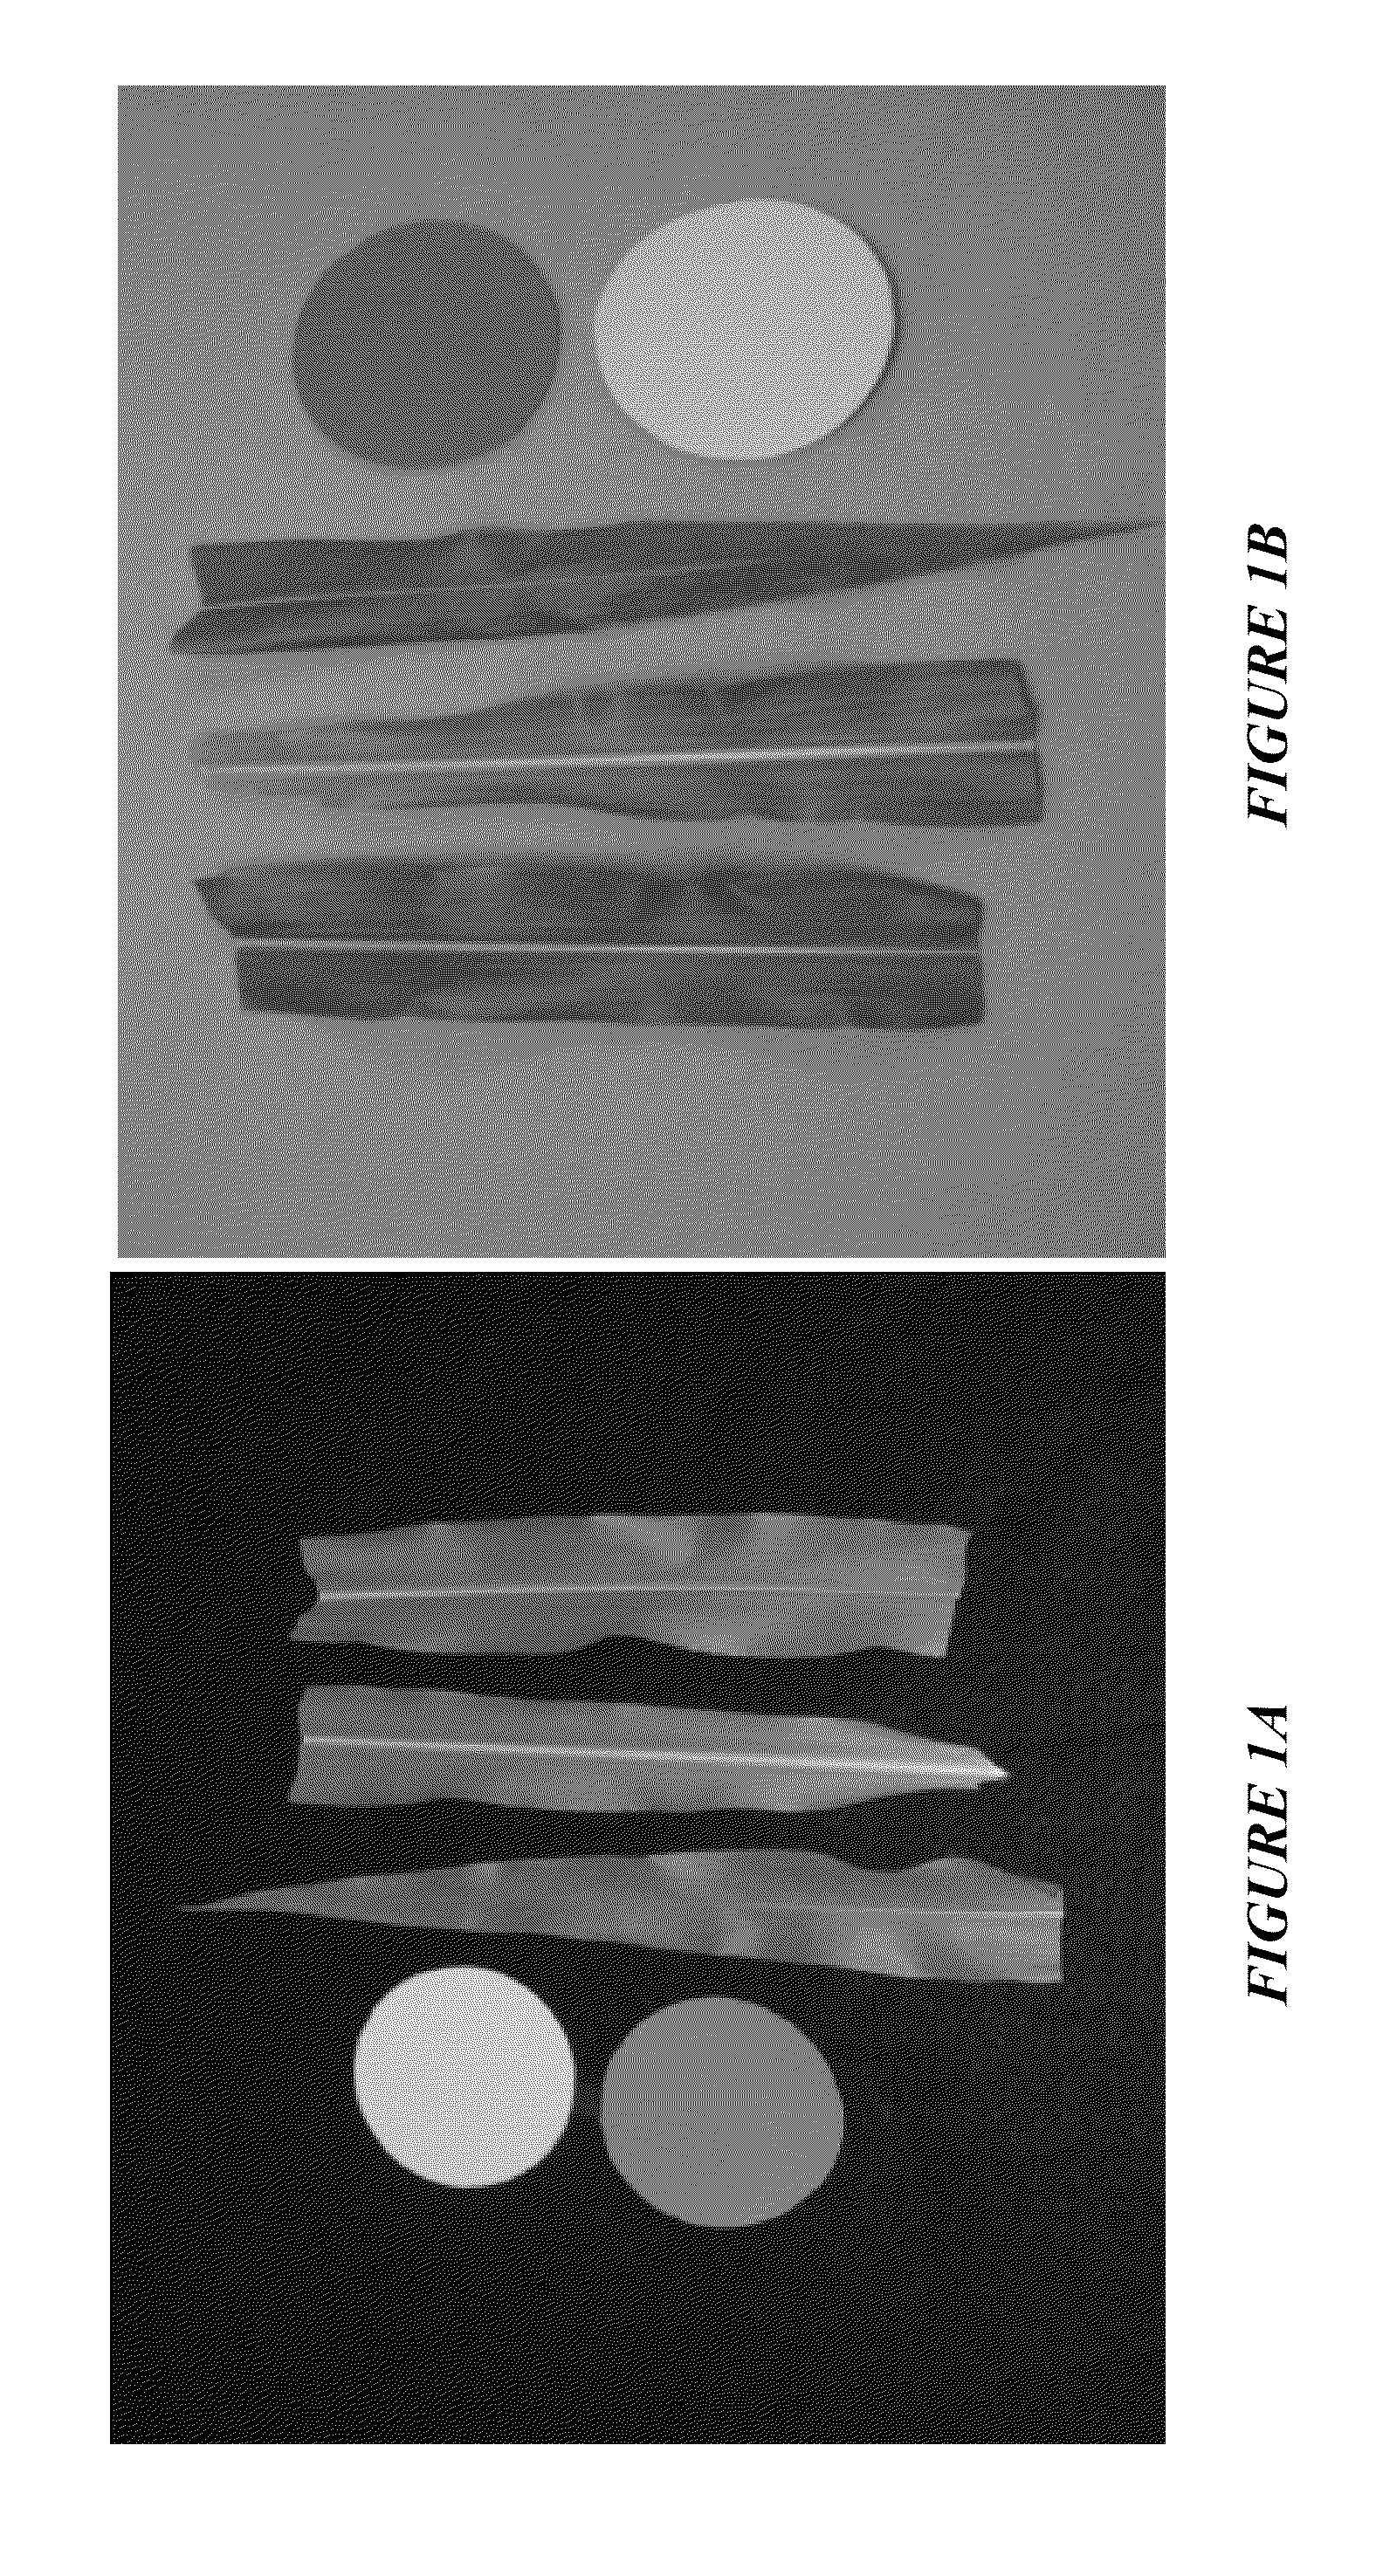 System and method of in-season nitrogen measurement and fertilization of non-leguminous crops from digital image analysis